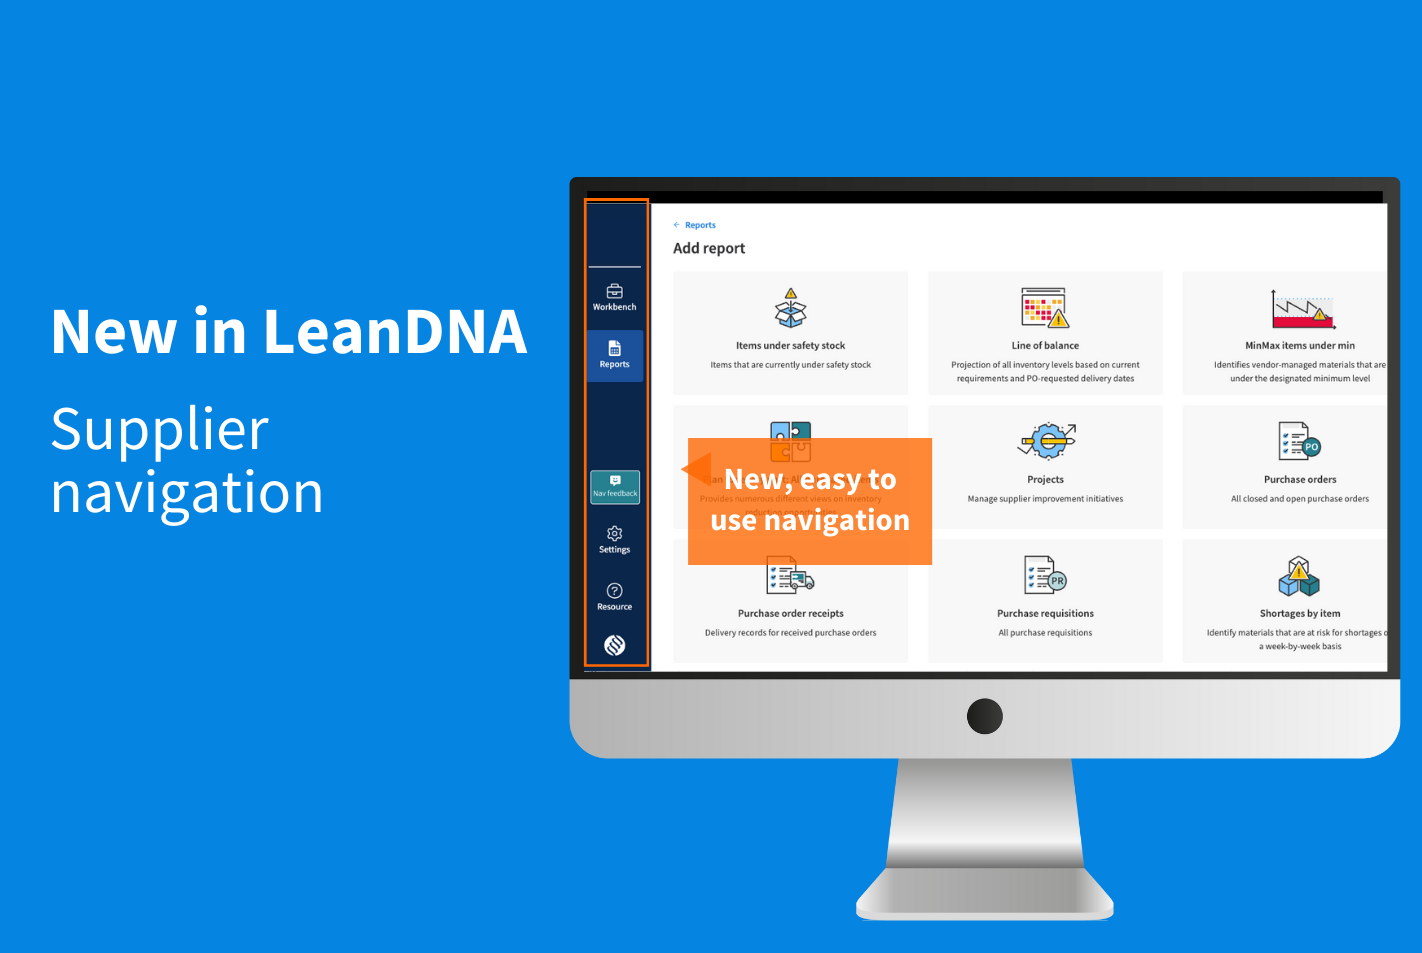 A Better Experience with LeanDNA’s New Supplier Navigation